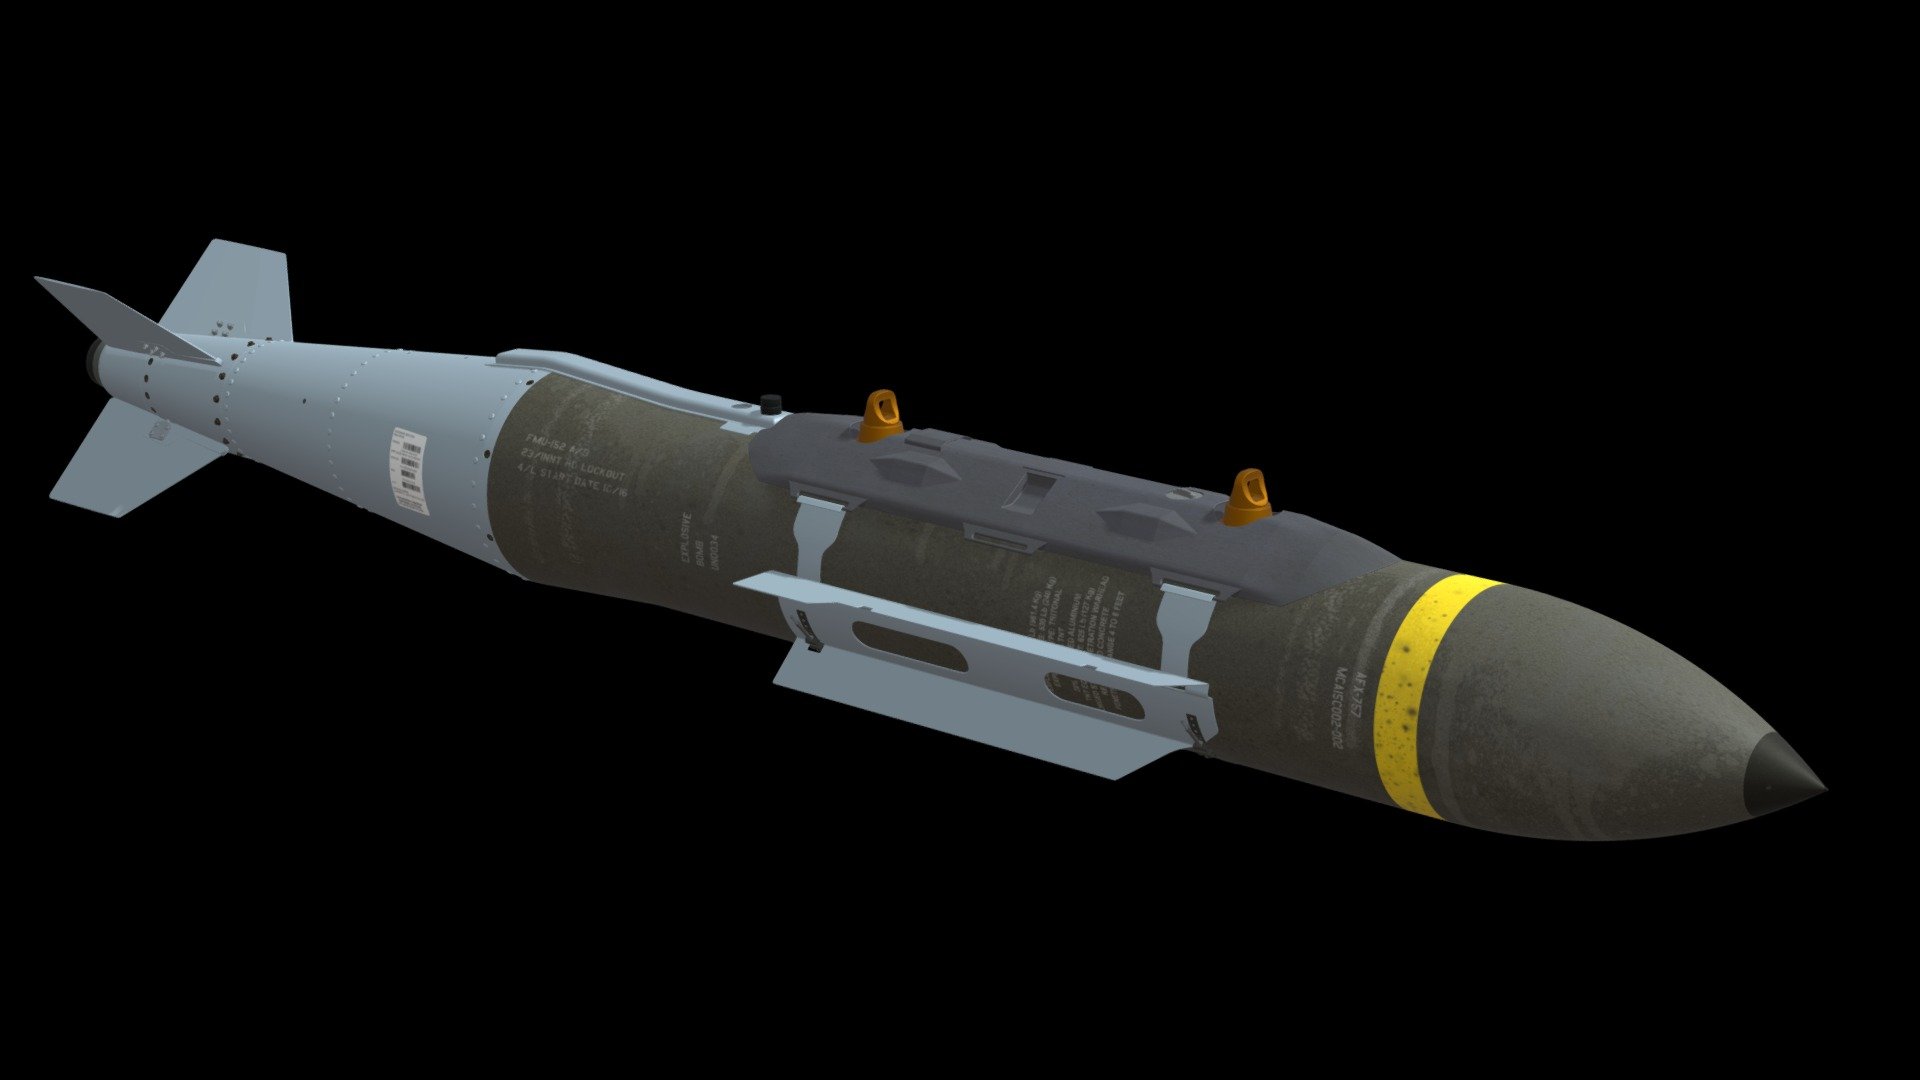 The designation GBU-31(V)/B was allocated to 2000 lb class JDAM bombs with guidance kits from Boeing. At least two different types of warhead can be used with the 2000 lb JDAM tailkits
•   MK 84: Standard 2000 lb LDGP (Low-Drag General Purpose) bomb
•   BLU-109: Instead of the MK 84.The BLU-109/B is a hardened penetration bomb with 2000 lb nominal weight.
it is intended to smash through concrete shelters and other hardened structures before exploding
There are four variants:
•   GBU-31 (V) 1/B MK 84 Bomb body
•   GBU-31 (V) 2/B MK 84 Bomb body with Navy thermal coating
•   GBU-31 (V) 3/B BLU-109 Bomb body
•   GBU-31 (V) 4/B BLU-109 Bomb body with Navy thermal coating
•   About the Models: Modeling was done in Autocad and imported into 3ds max
The model was built using information, photos and images from internet, therefore its geometry and details are not engineering correct or exact.
It is a personal artistic interpretation

It is a high poly model not suitable for games - GBU 31(V) 3/B JDAM - 3D model by Edgar Brito (@e.brito) 3d model